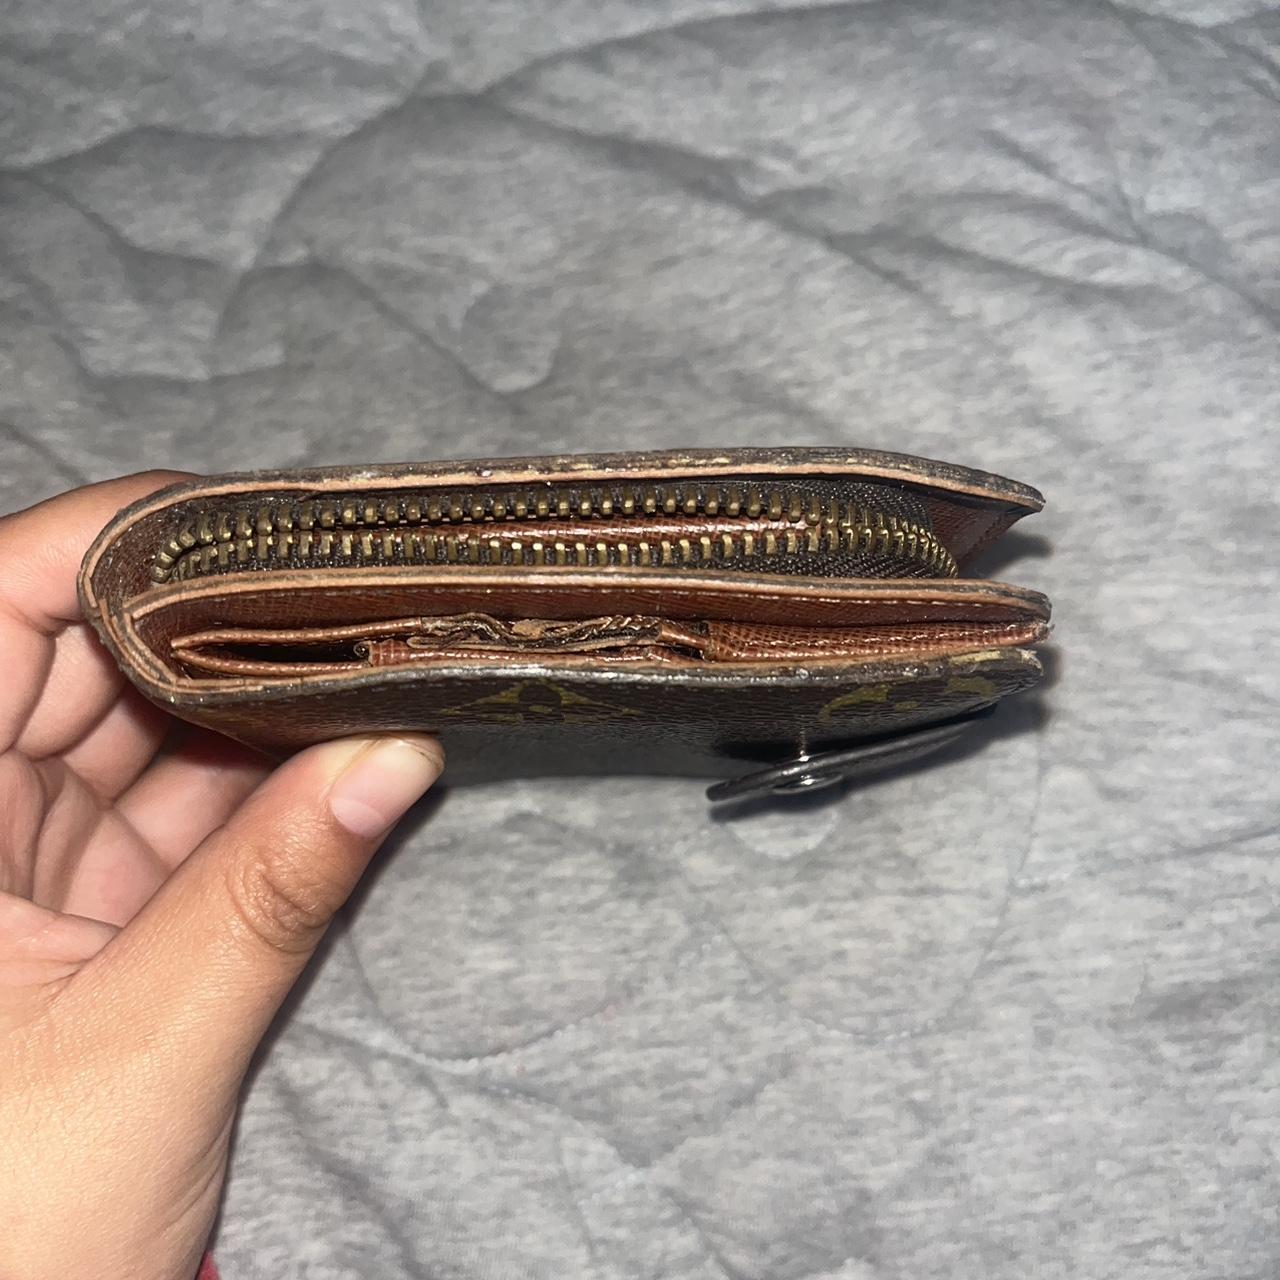 Real LV wallet Send offers!! It looks scratches - Depop